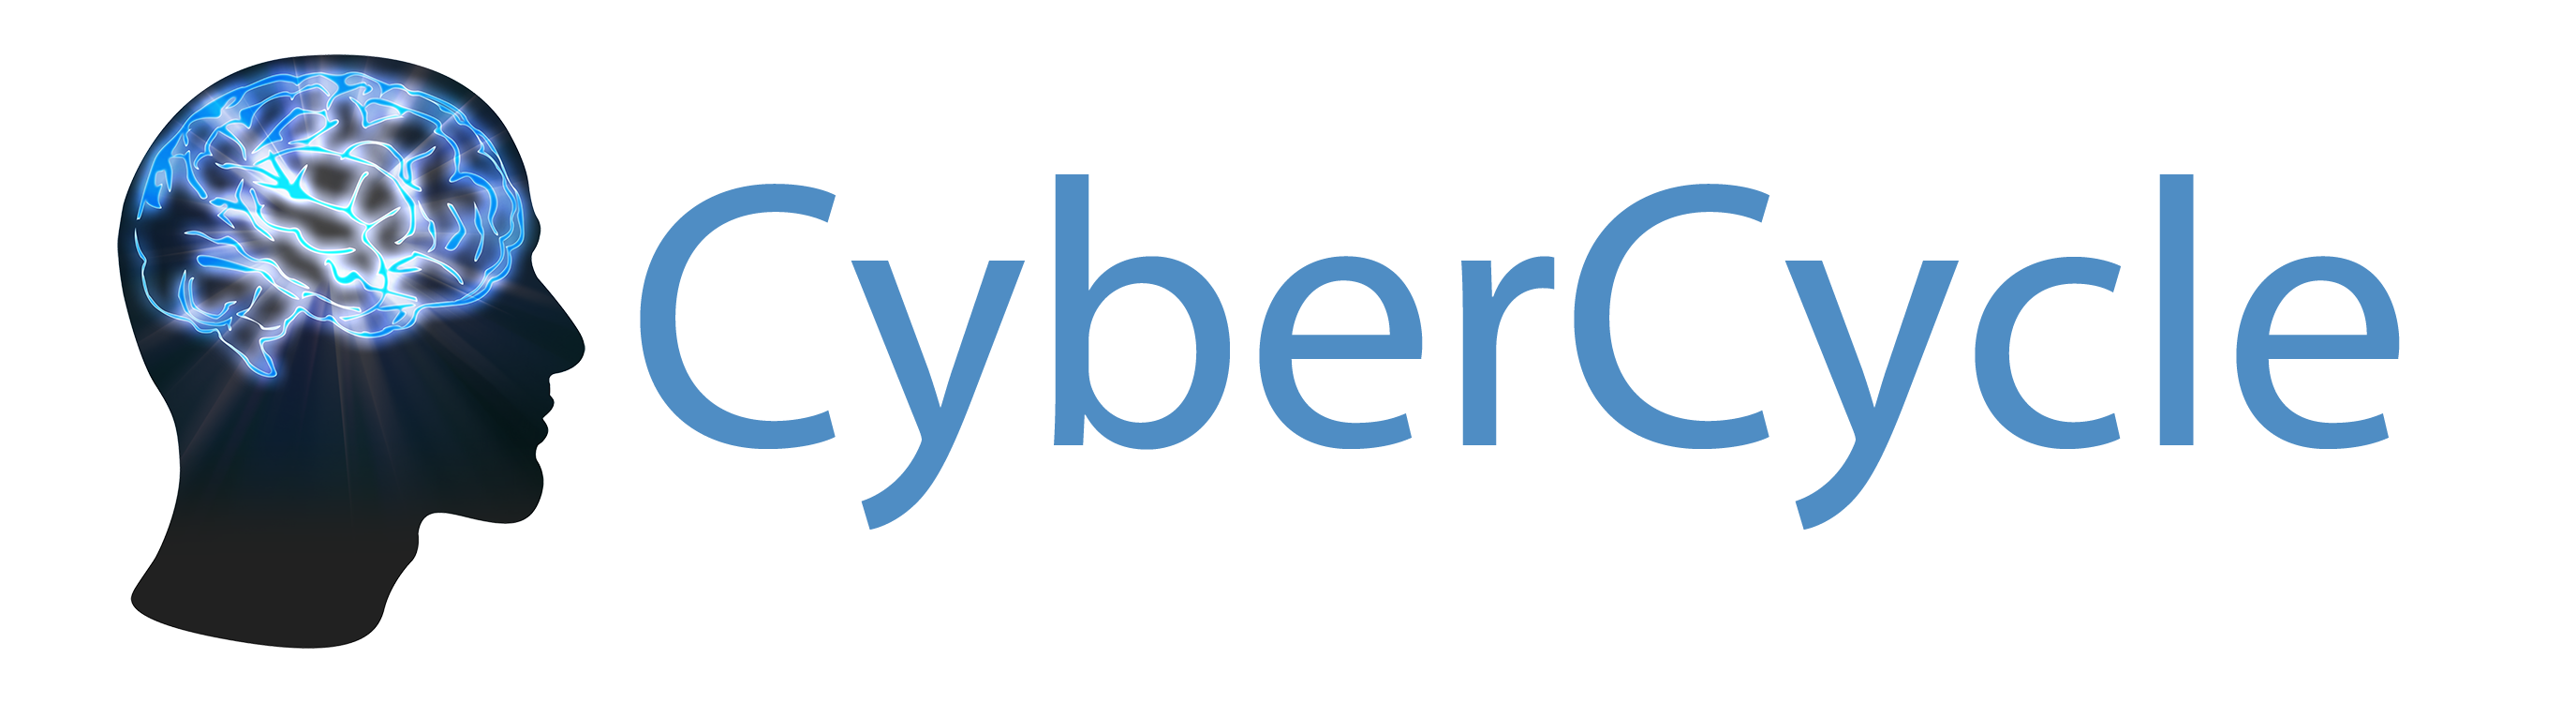 CyberCycle